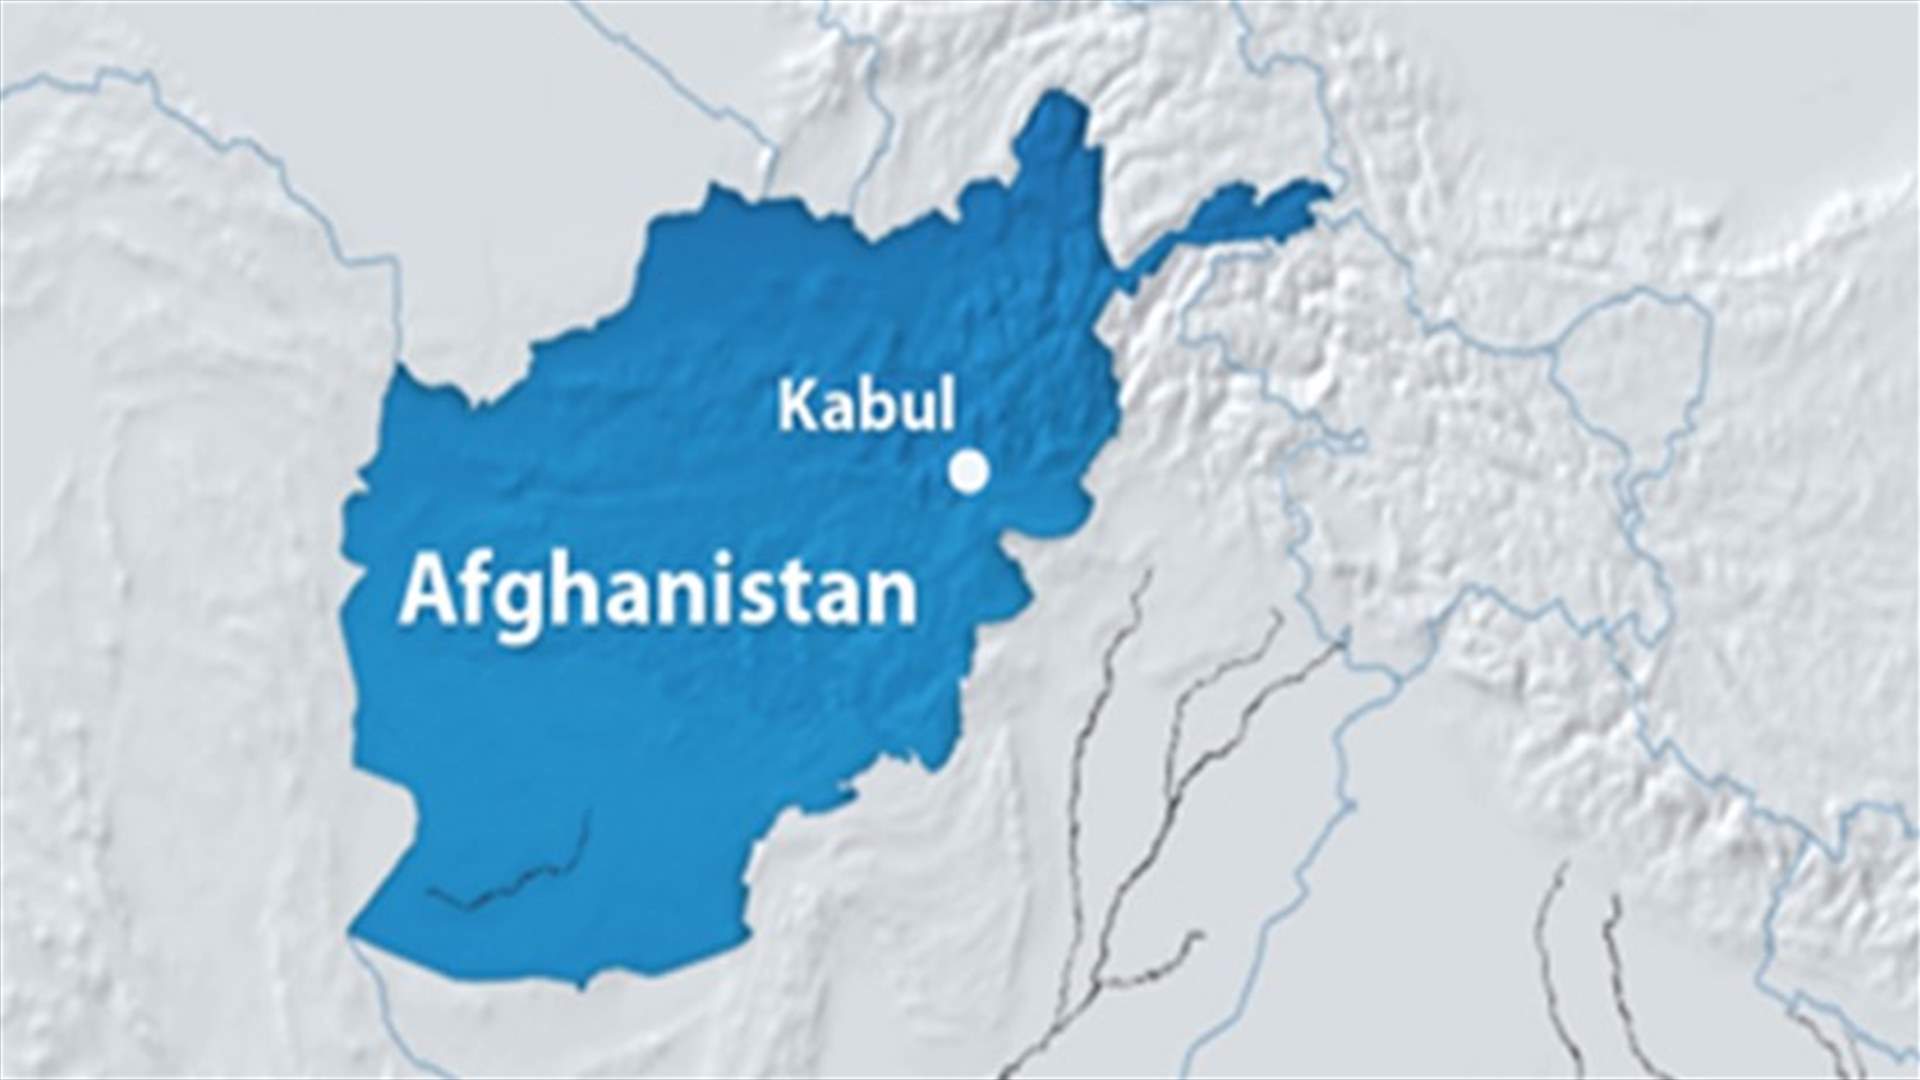 Suicide bombing in Afghan capital, near Russian embassy - police